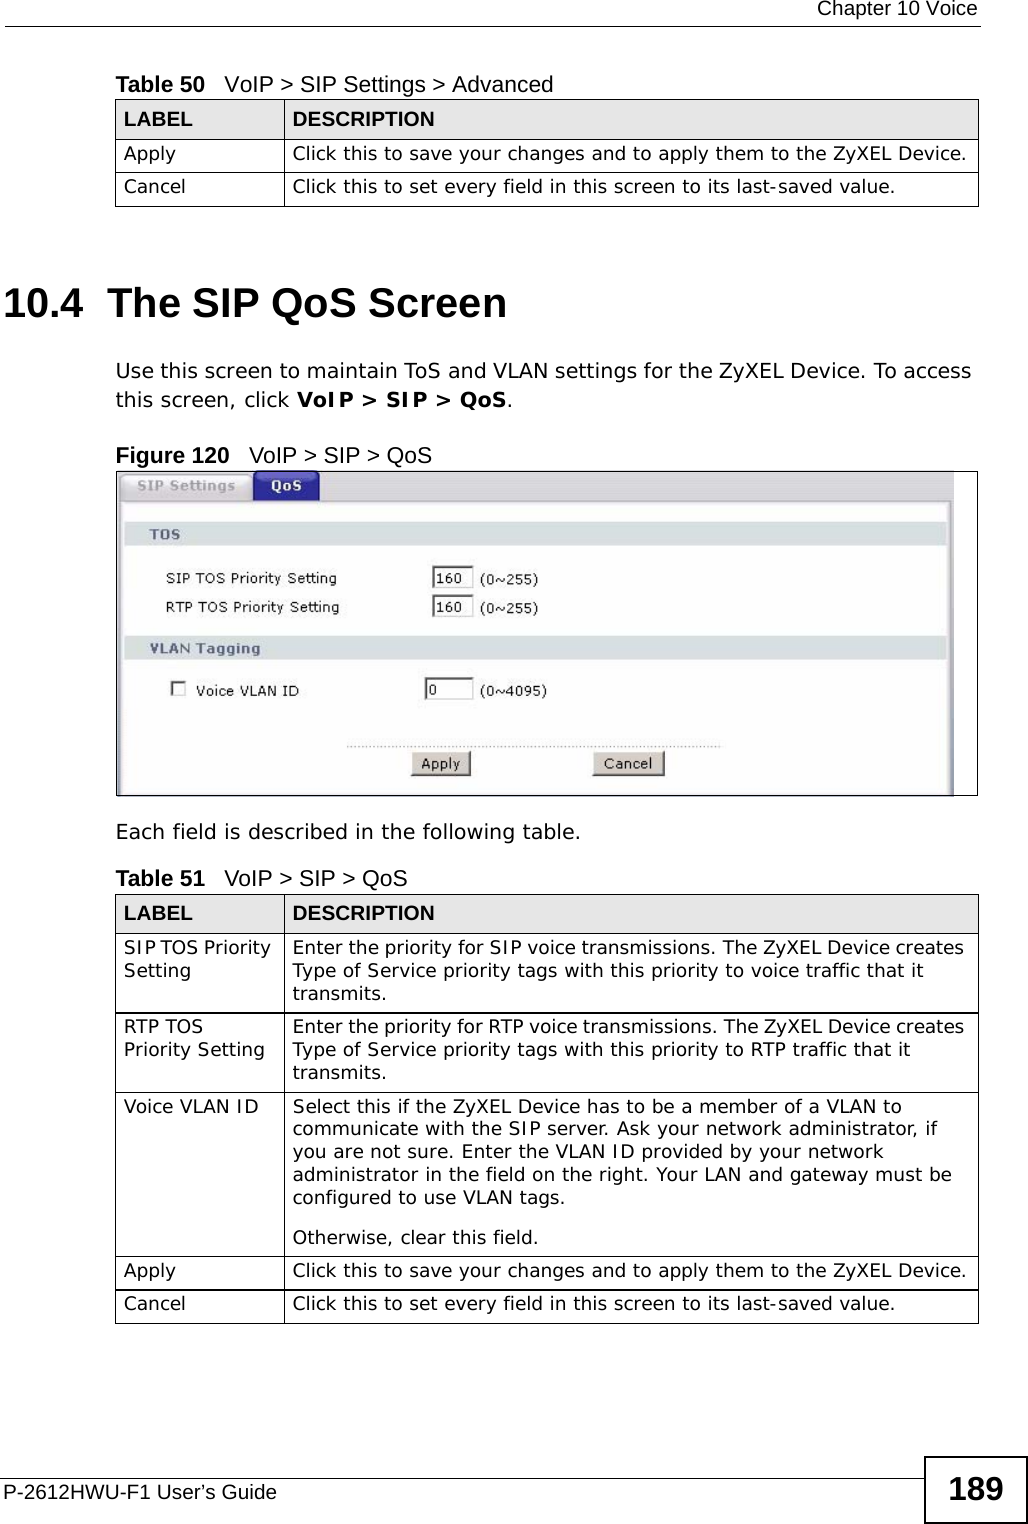  Chapter 10 VoiceP-2612HWU-F1 User’s Guide 18910.4  The SIP QoS Screen Use this screen to maintain ToS and VLAN settings for the ZyXEL Device. To access this screen, click VoIP &gt; SIP &gt; QoS.Figure 120   VoIP &gt; SIP &gt; QoSEach field is described in the following table.Apply Click this to save your changes and to apply them to the ZyXEL Device.Cancel Click this to set every field in this screen to its last-saved value.Table 50   VoIP &gt; SIP Settings &gt; AdvancedLABEL DESCRIPTIONTable 51   VoIP &gt; SIP &gt; QoSLABEL DESCRIPTIONSIP TOS Priority Setting Enter the priority for SIP voice transmissions. The ZyXEL Device creates Type of Service priority tags with this priority to voice traffic that it transmits.RTP TOS Priority Setting Enter the priority for RTP voice transmissions. The ZyXEL Device creates Type of Service priority tags with this priority to RTP traffic that it transmits.Voice VLAN ID Select this if the ZyXEL Device has to be a member of a VLAN to communicate with the SIP server. Ask your network administrator, if you are not sure. Enter the VLAN ID provided by your network administrator in the field on the right. Your LAN and gateway must be configured to use VLAN tags.Otherwise, clear this field.Apply Click this to save your changes and to apply them to the ZyXEL Device.Cancel Click this to set every field in this screen to its last-saved value.